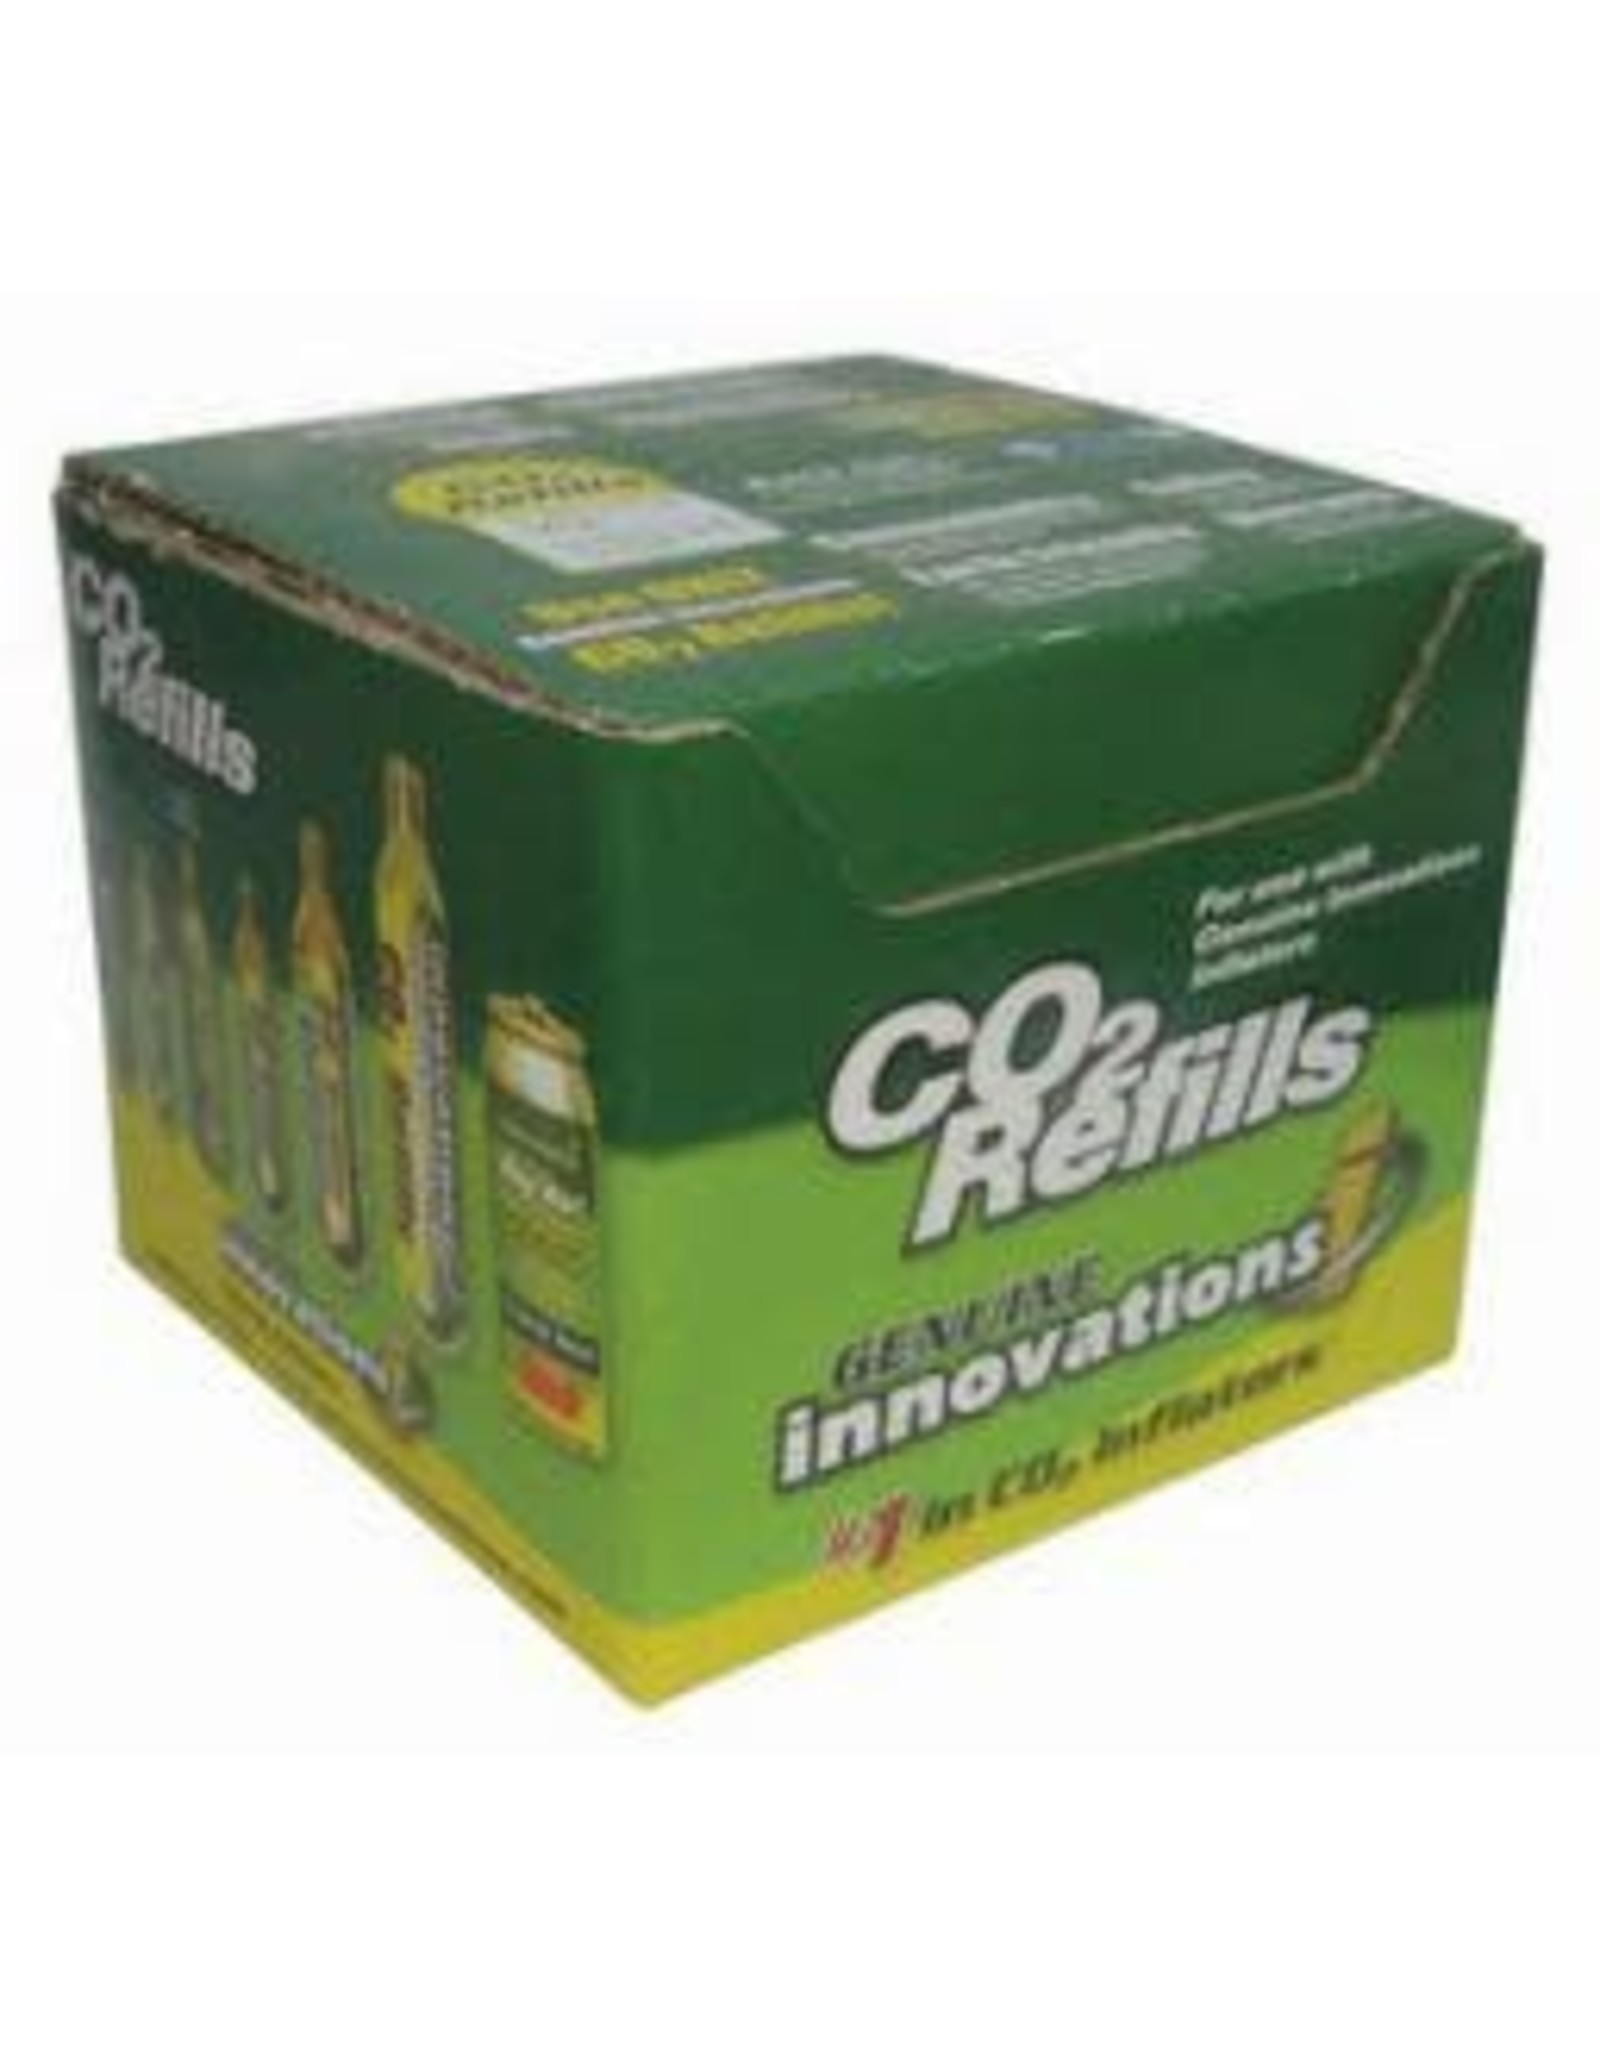 Innovations in Cycl. Innovations Co2 16g Threaded Inflation Cartridge